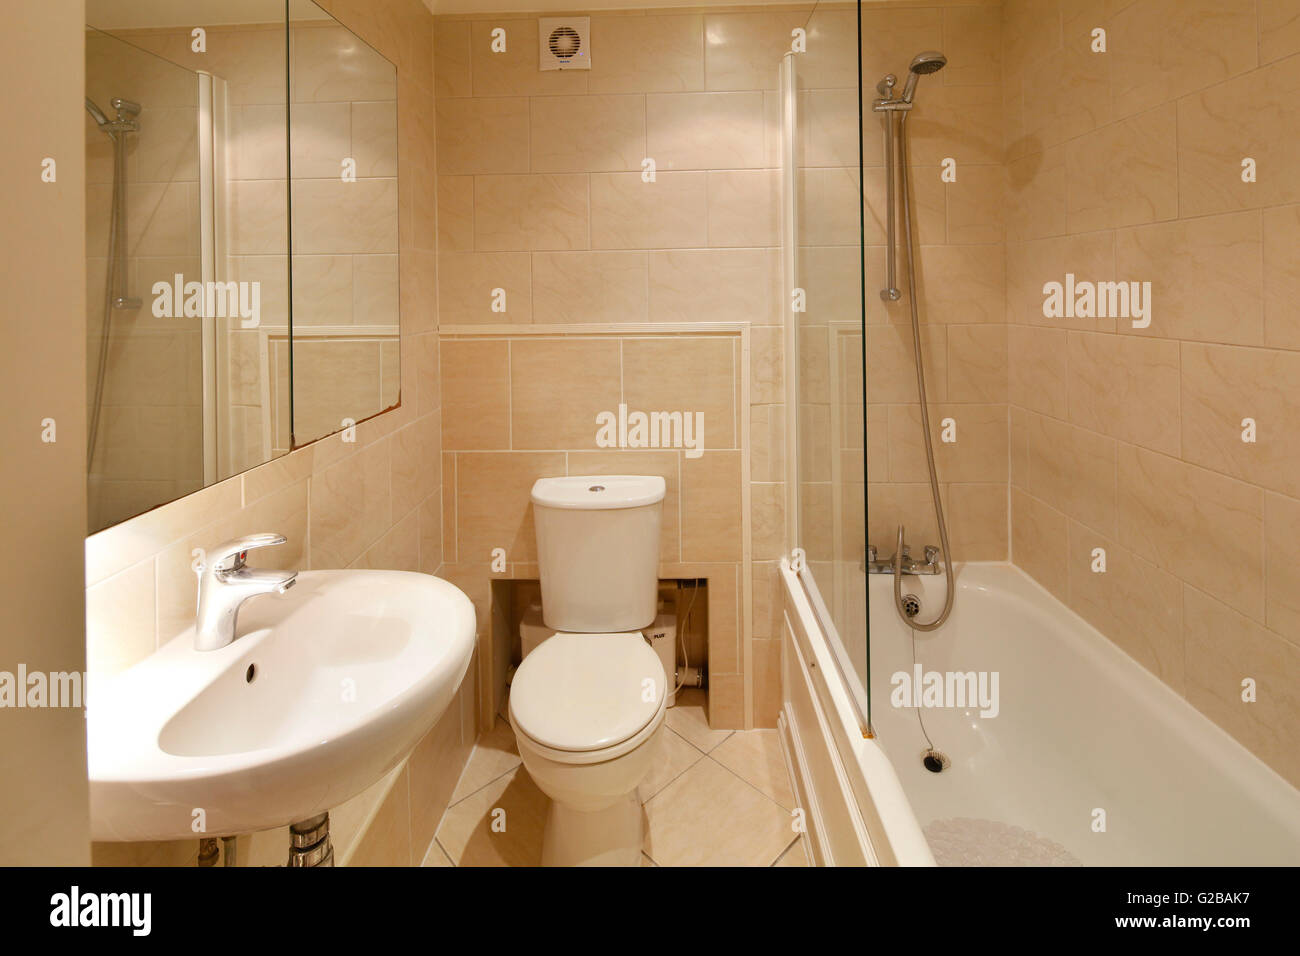 Pavilion Court, Hampstead. Bathroom with white features and a glass shower door. Stock Photo